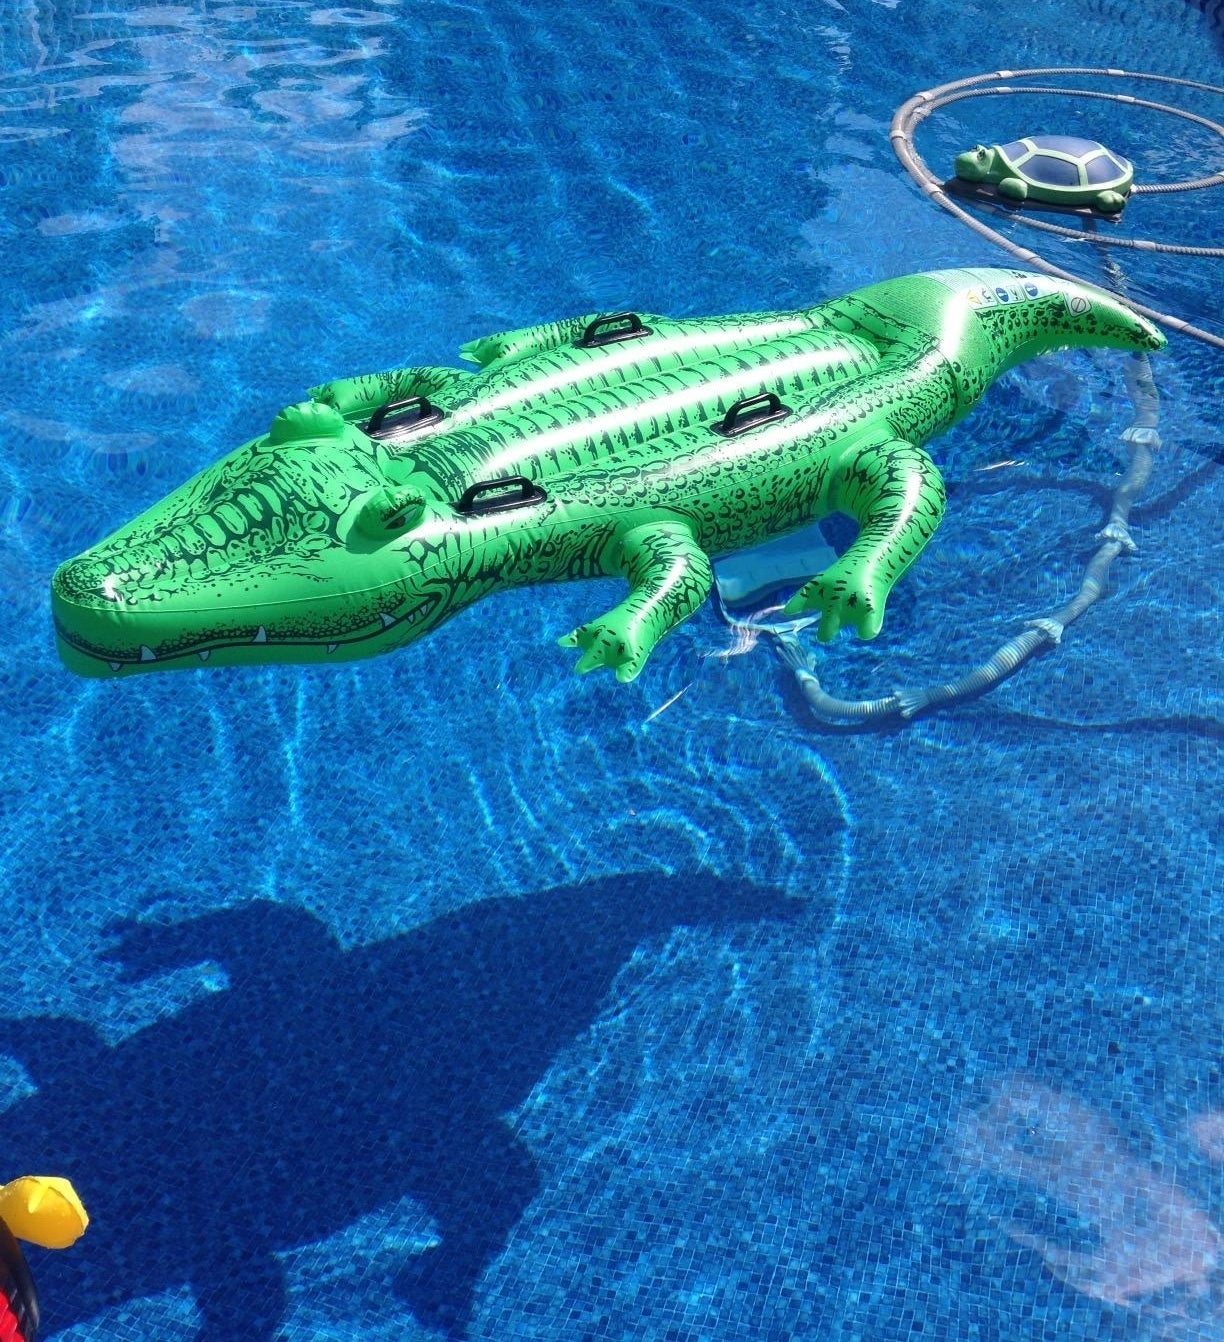 A green alligator pool float with black handles